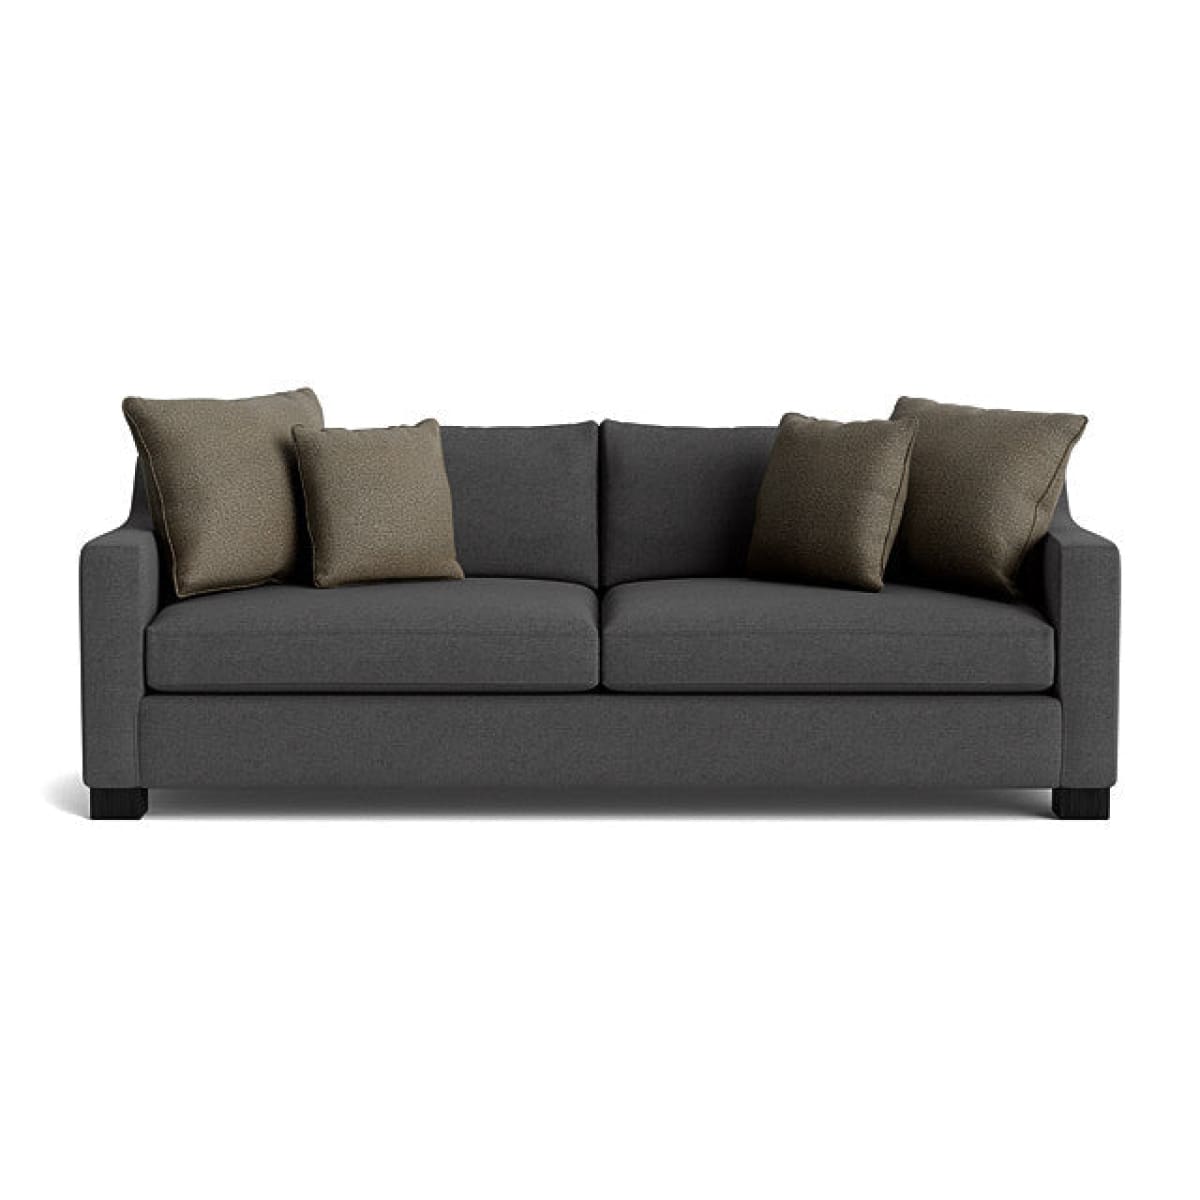 Ewing Sofa - Sectional - Entice Graphite